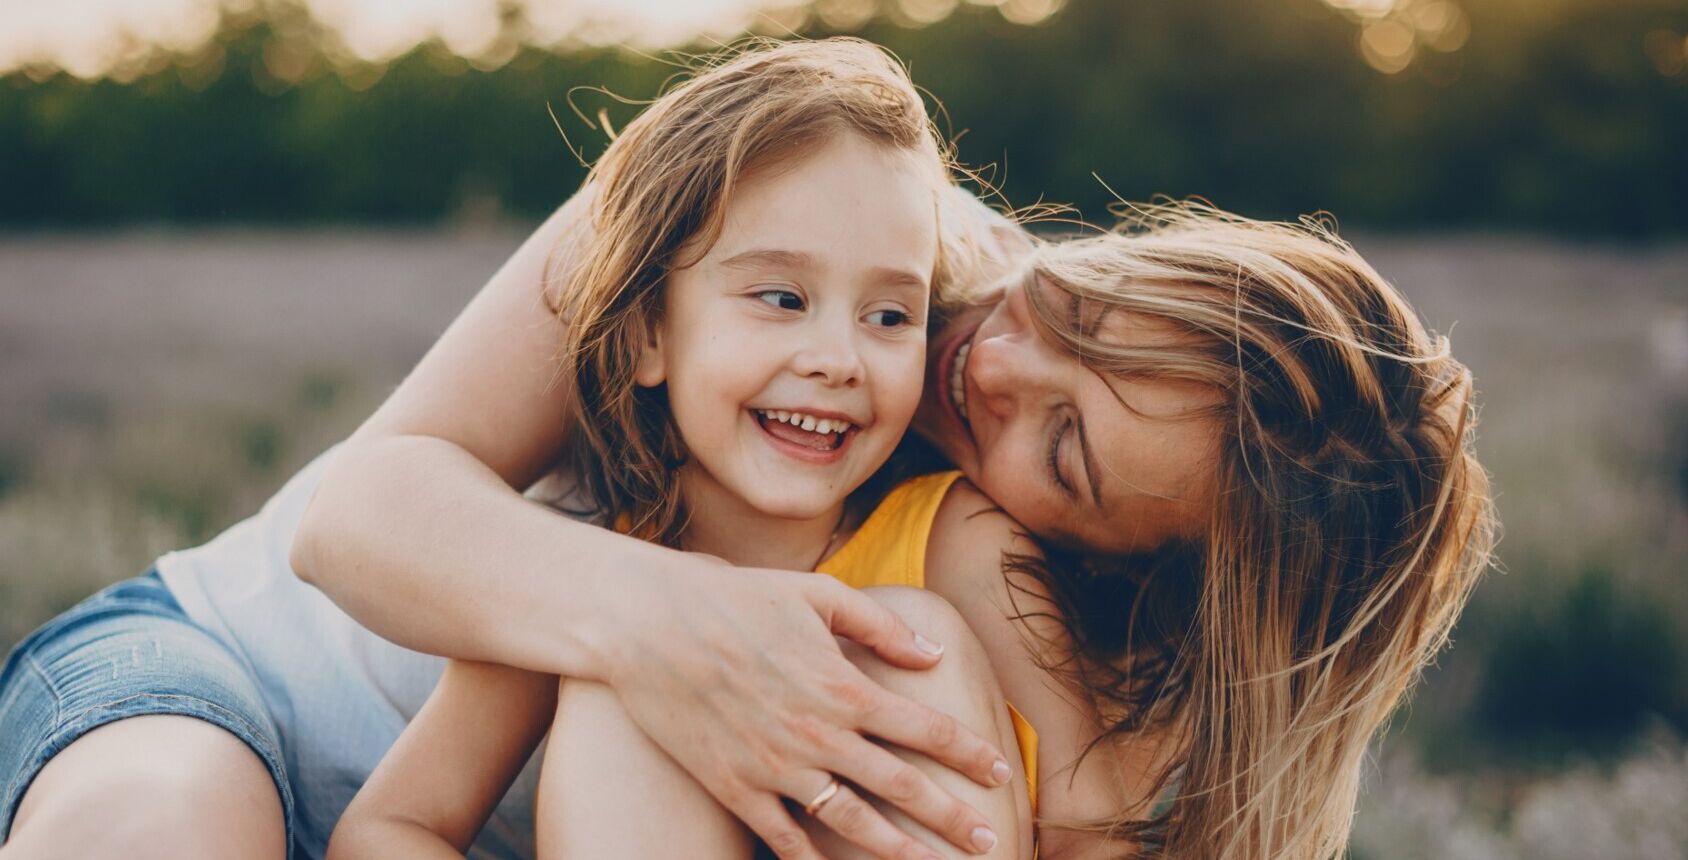 Lady hugging a smiling child in a field